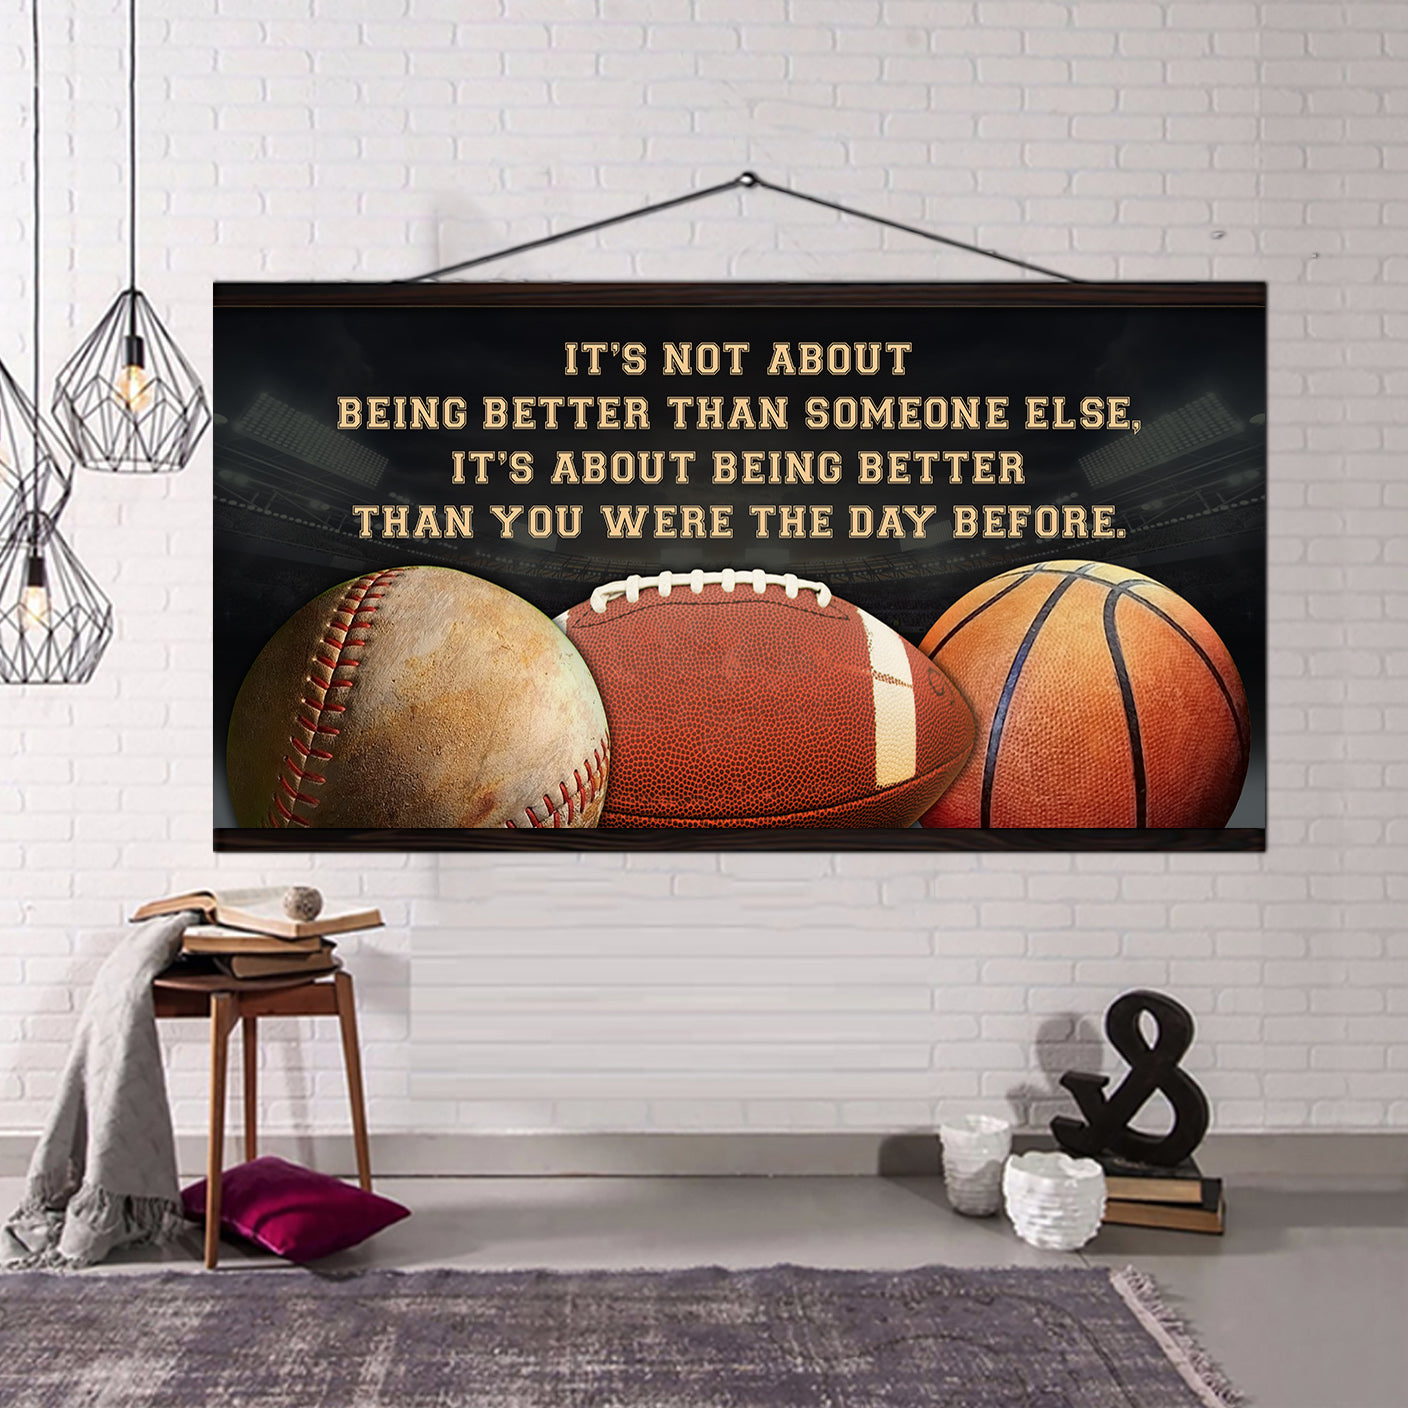 Baketball Ver 6 It is not About Being Better Than Someone Else It is about being better than you were the day before